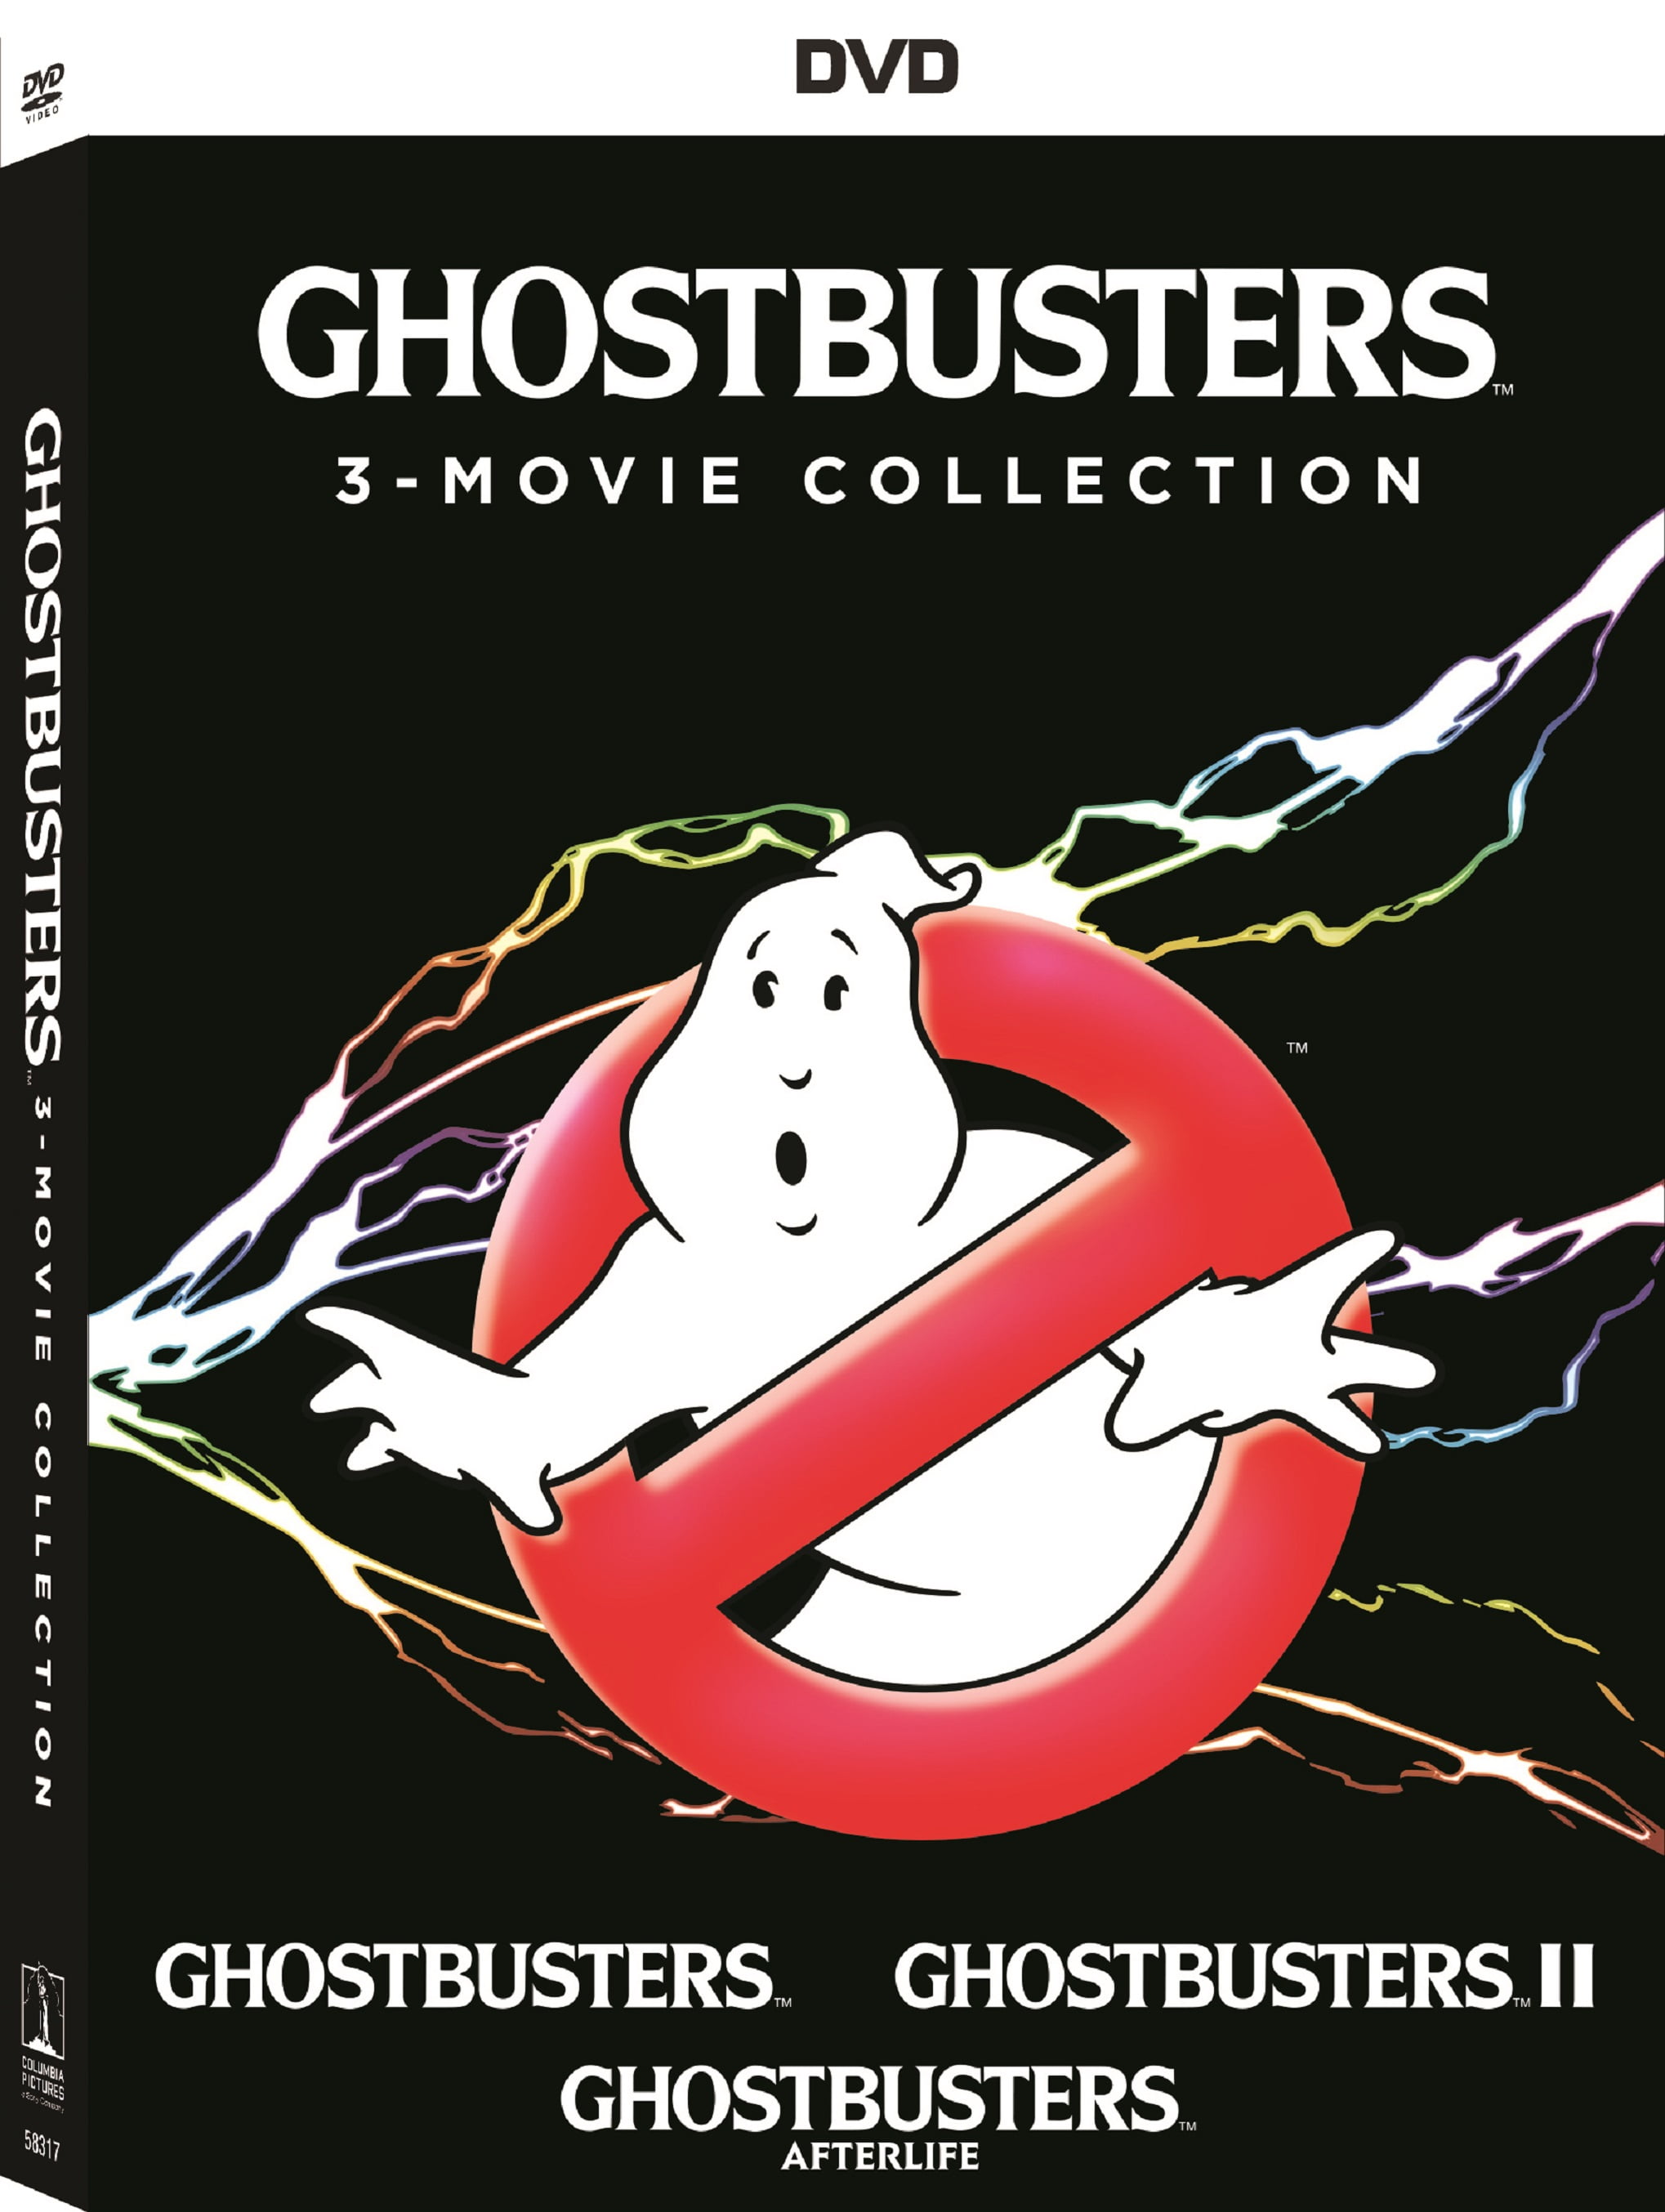 Ghostbusters (1984) - Waterville Creates